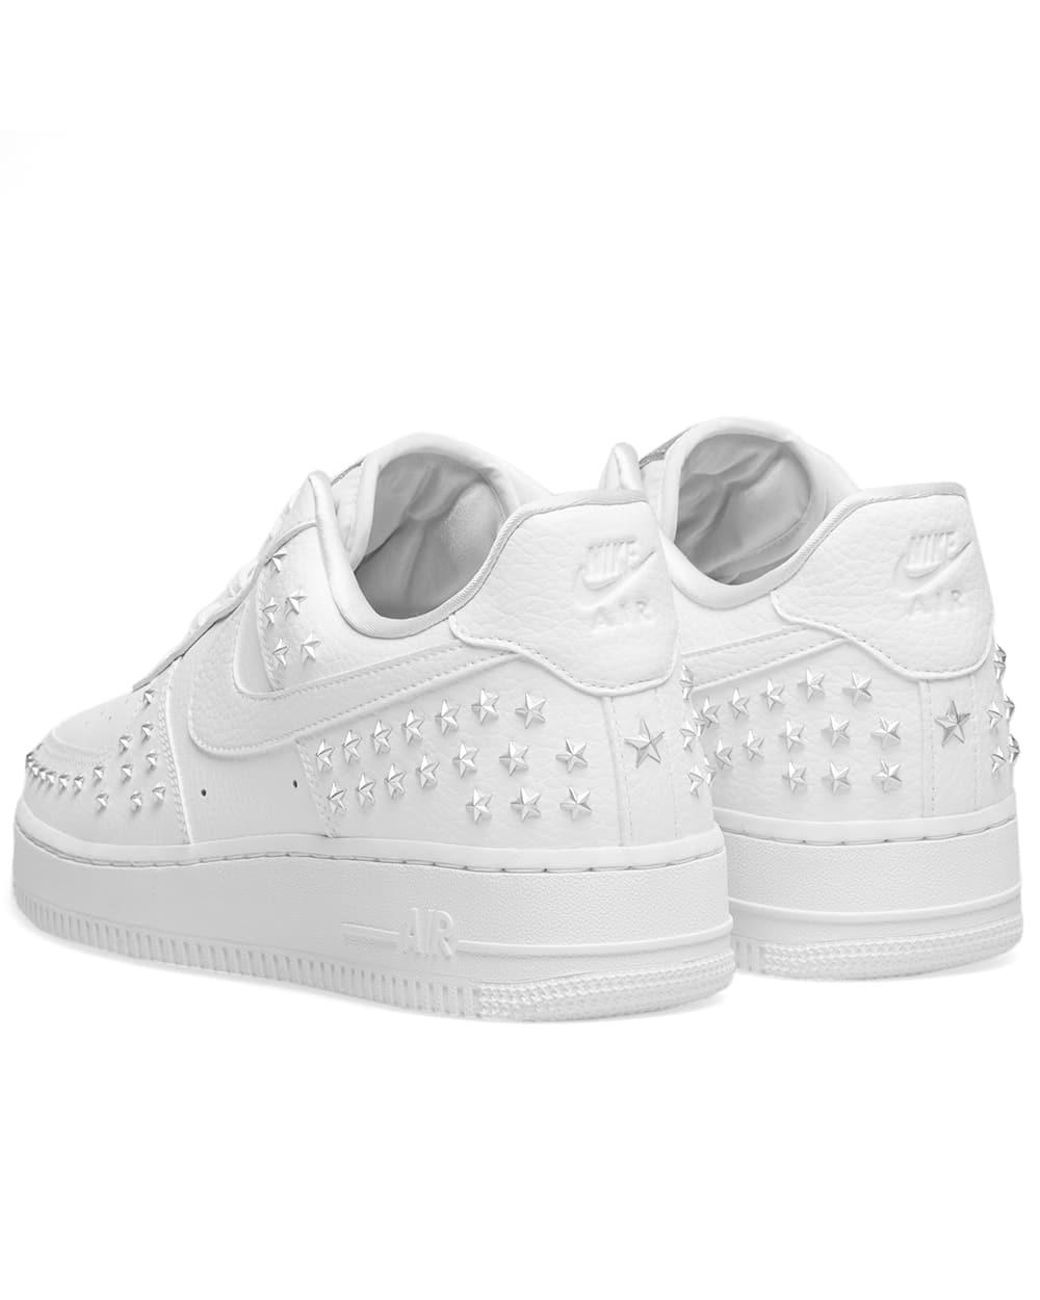 Nike Air Force 1' 07 Xx Studded Shoe in White | Lyst